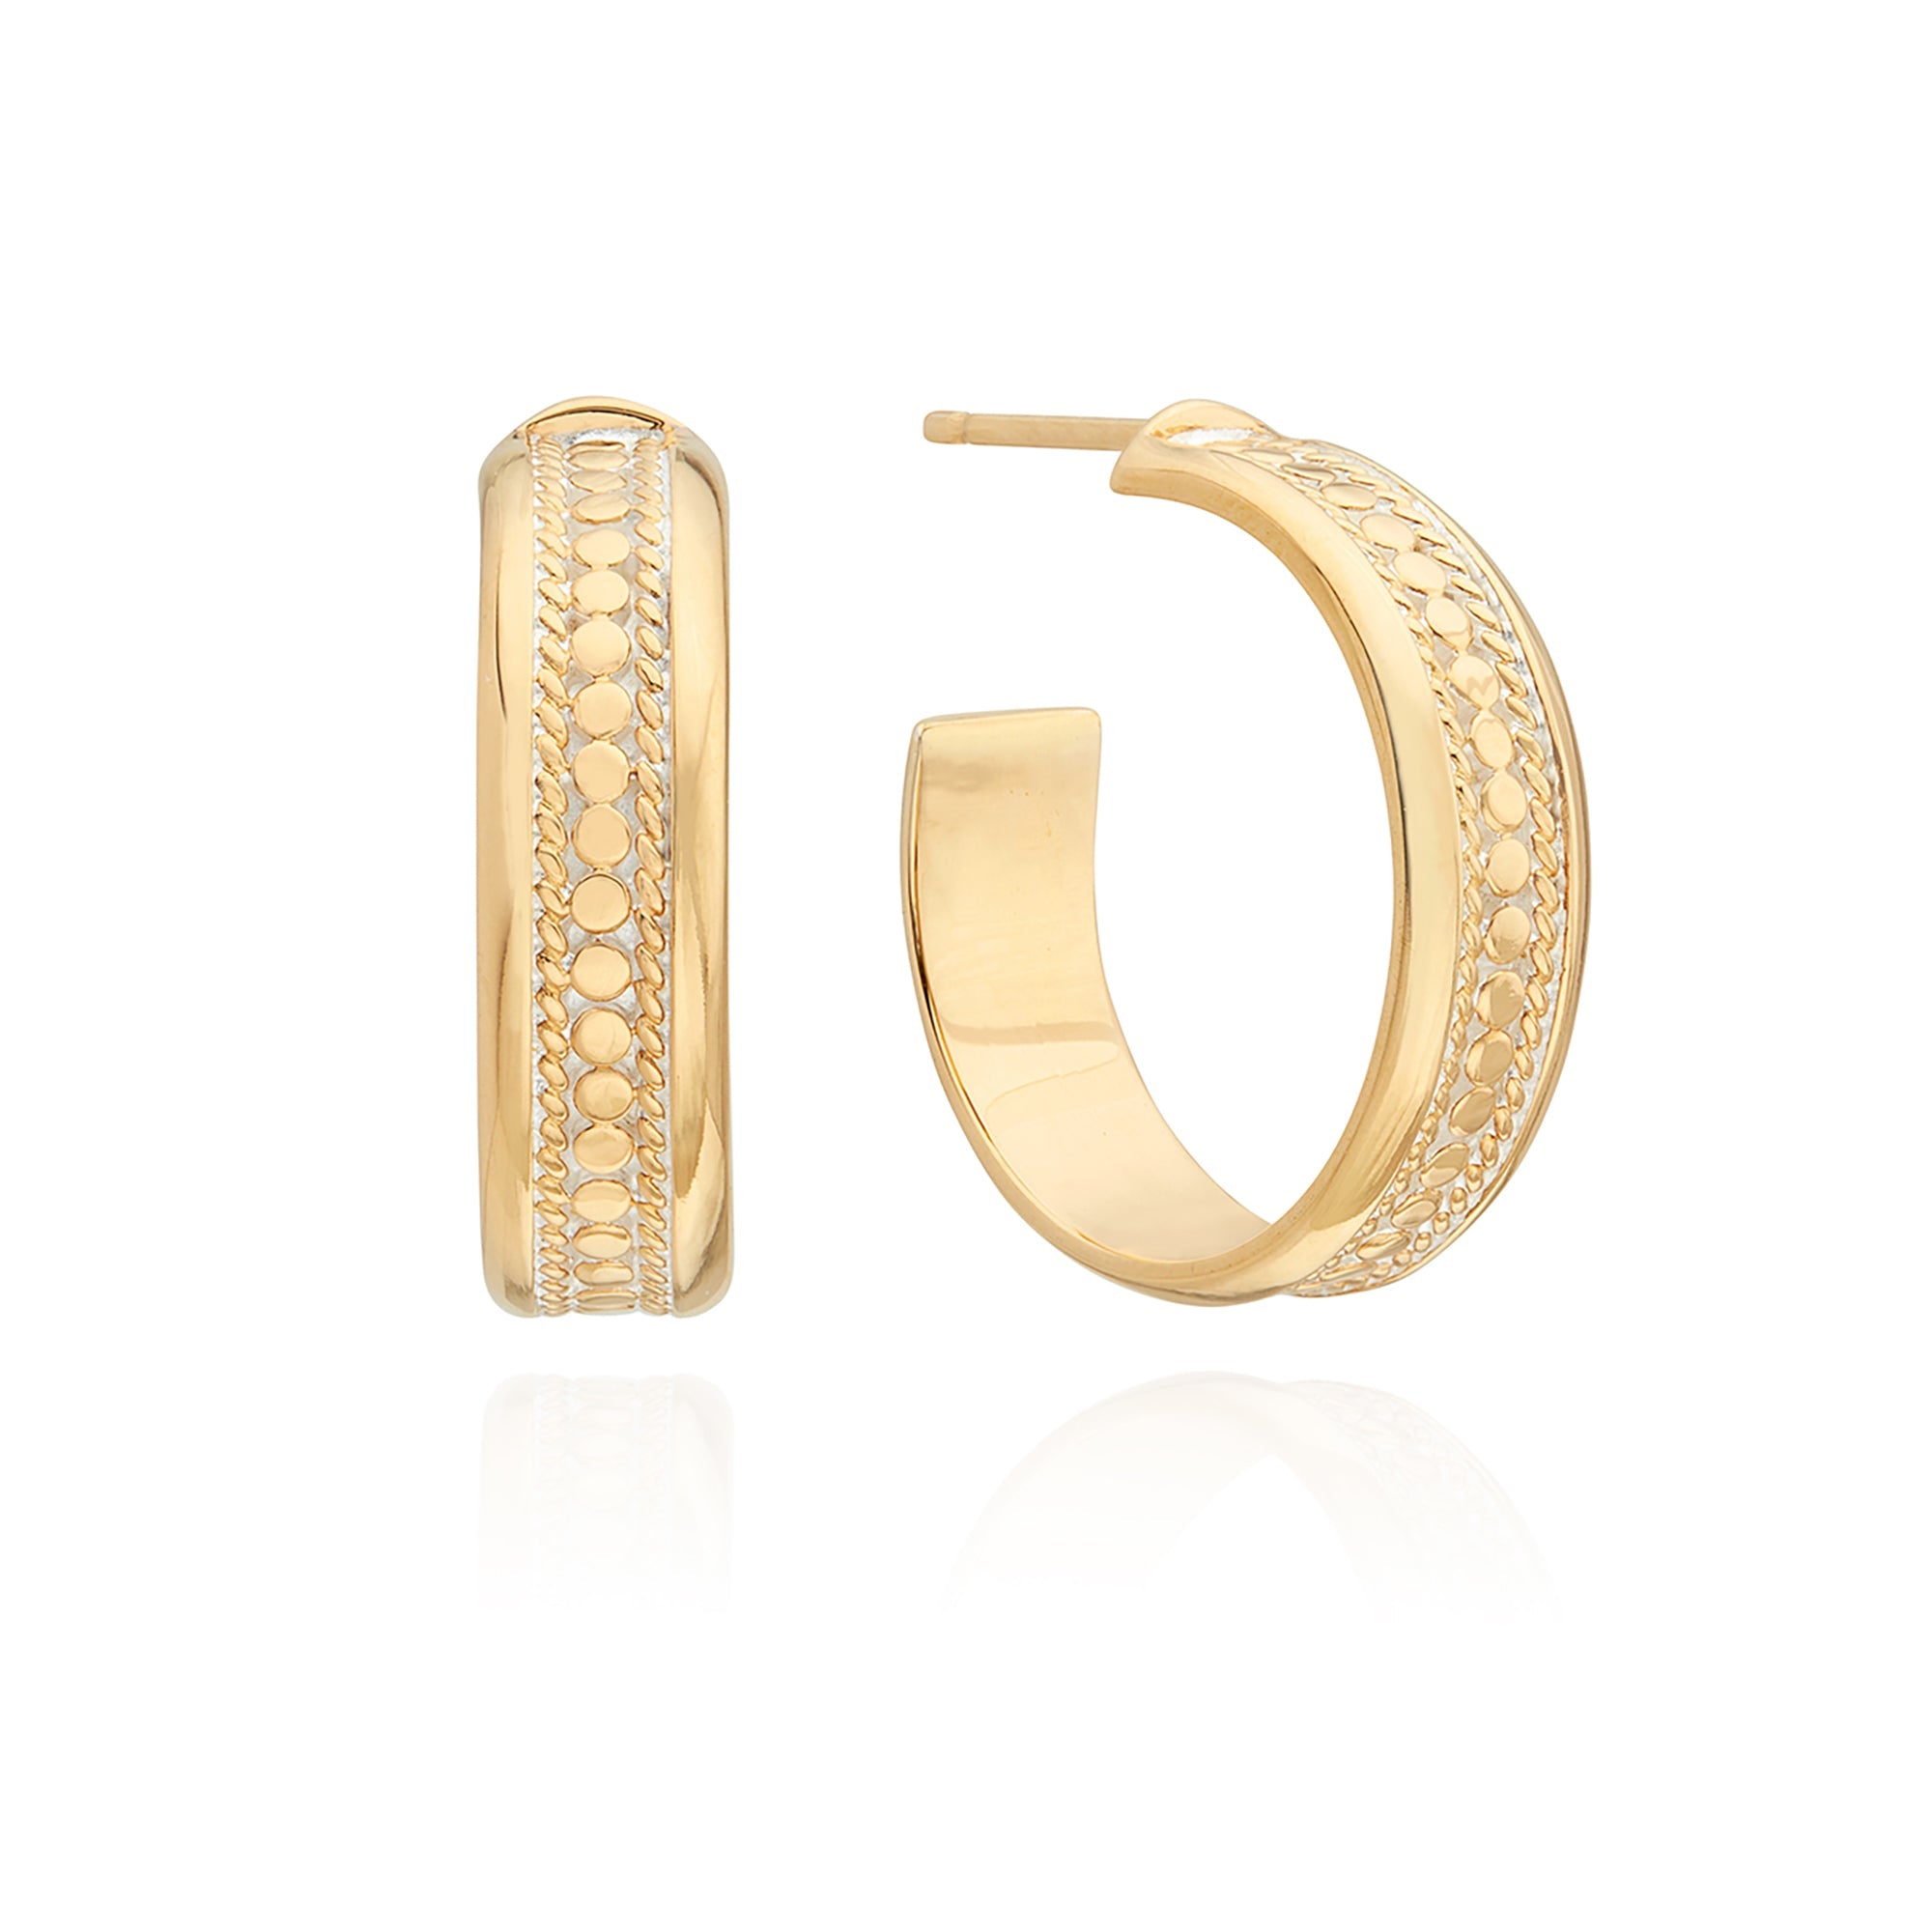 Gold hoops with smooth rims and dotted detailing